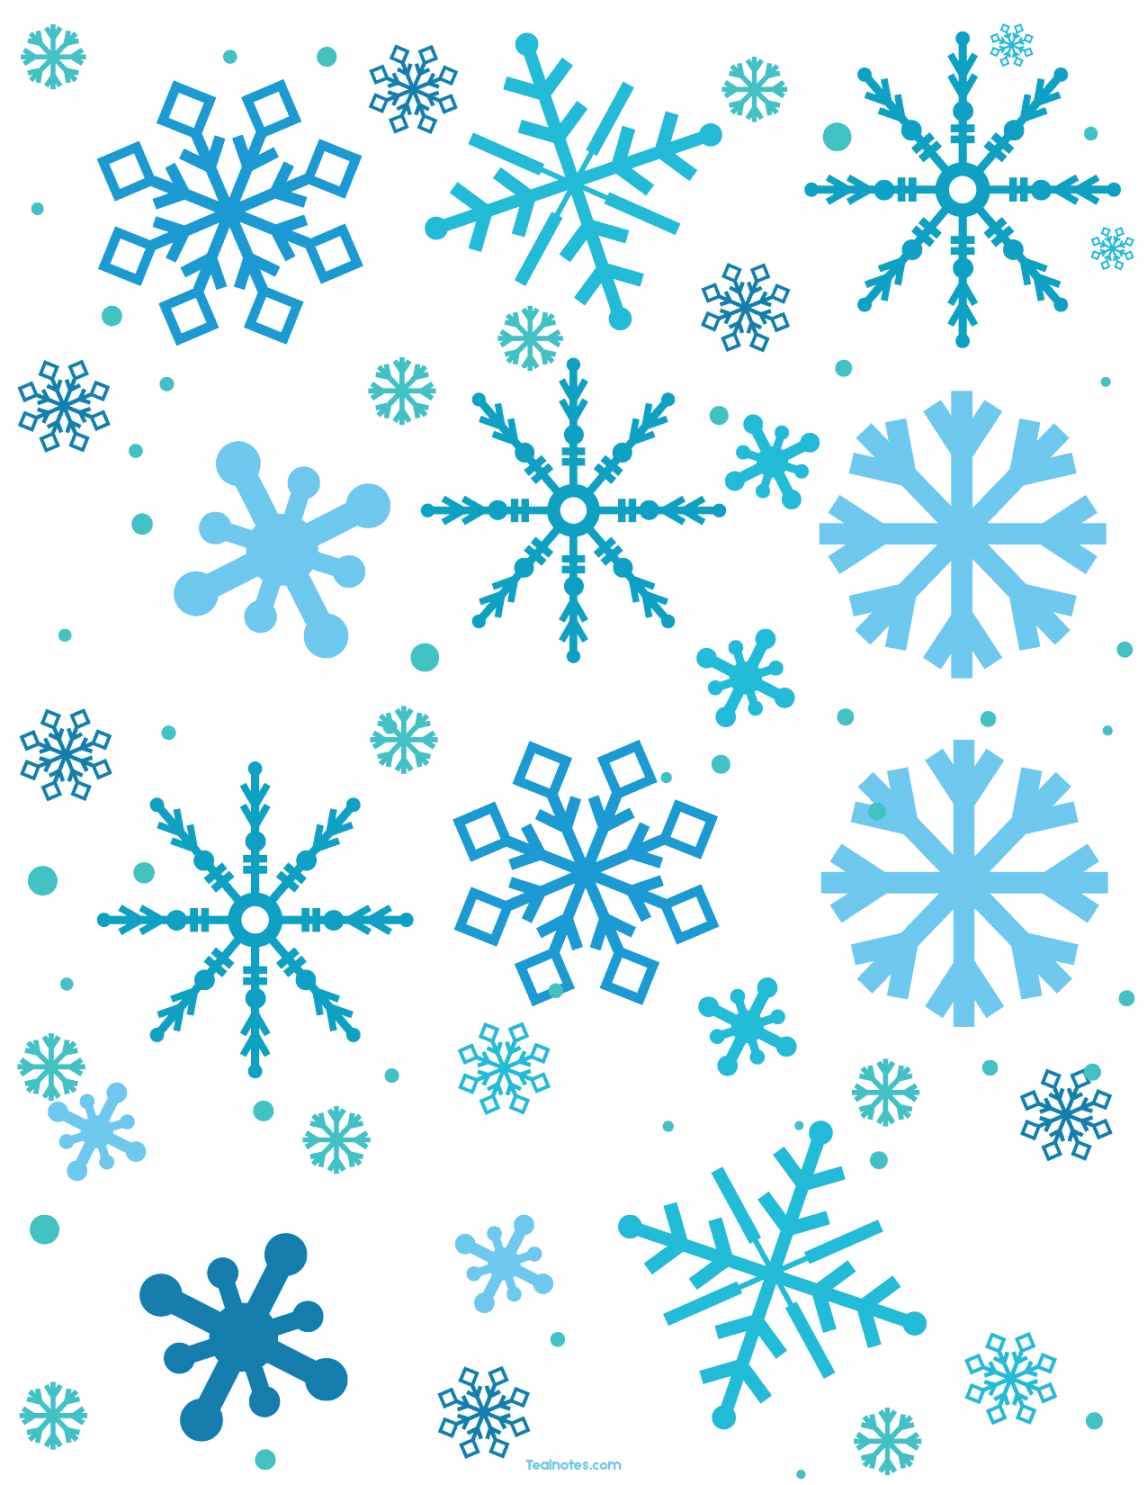 Free Snowflake Template: Easy Paper Snowflakes To Cut And Color - FREE Printables - Snowflakes Printable Free